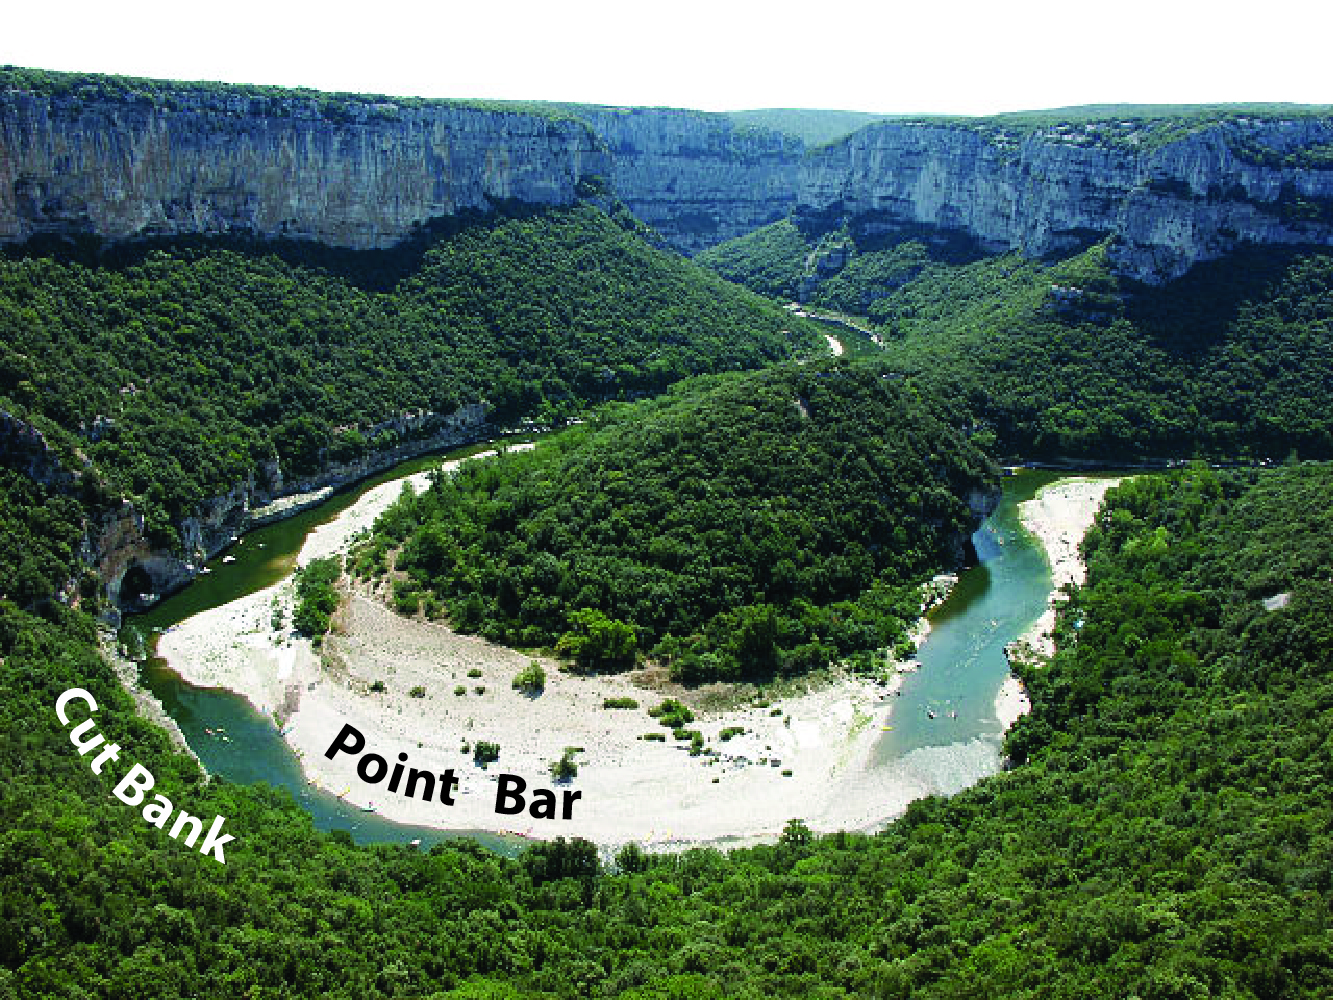 U-shaped river bend in France with sandy deposition at the inside of the bend labeled Point Bar and erosion on the outside of the bend labeled Cut Bank; there is lush green vegetation around the river and cliffs in the background.